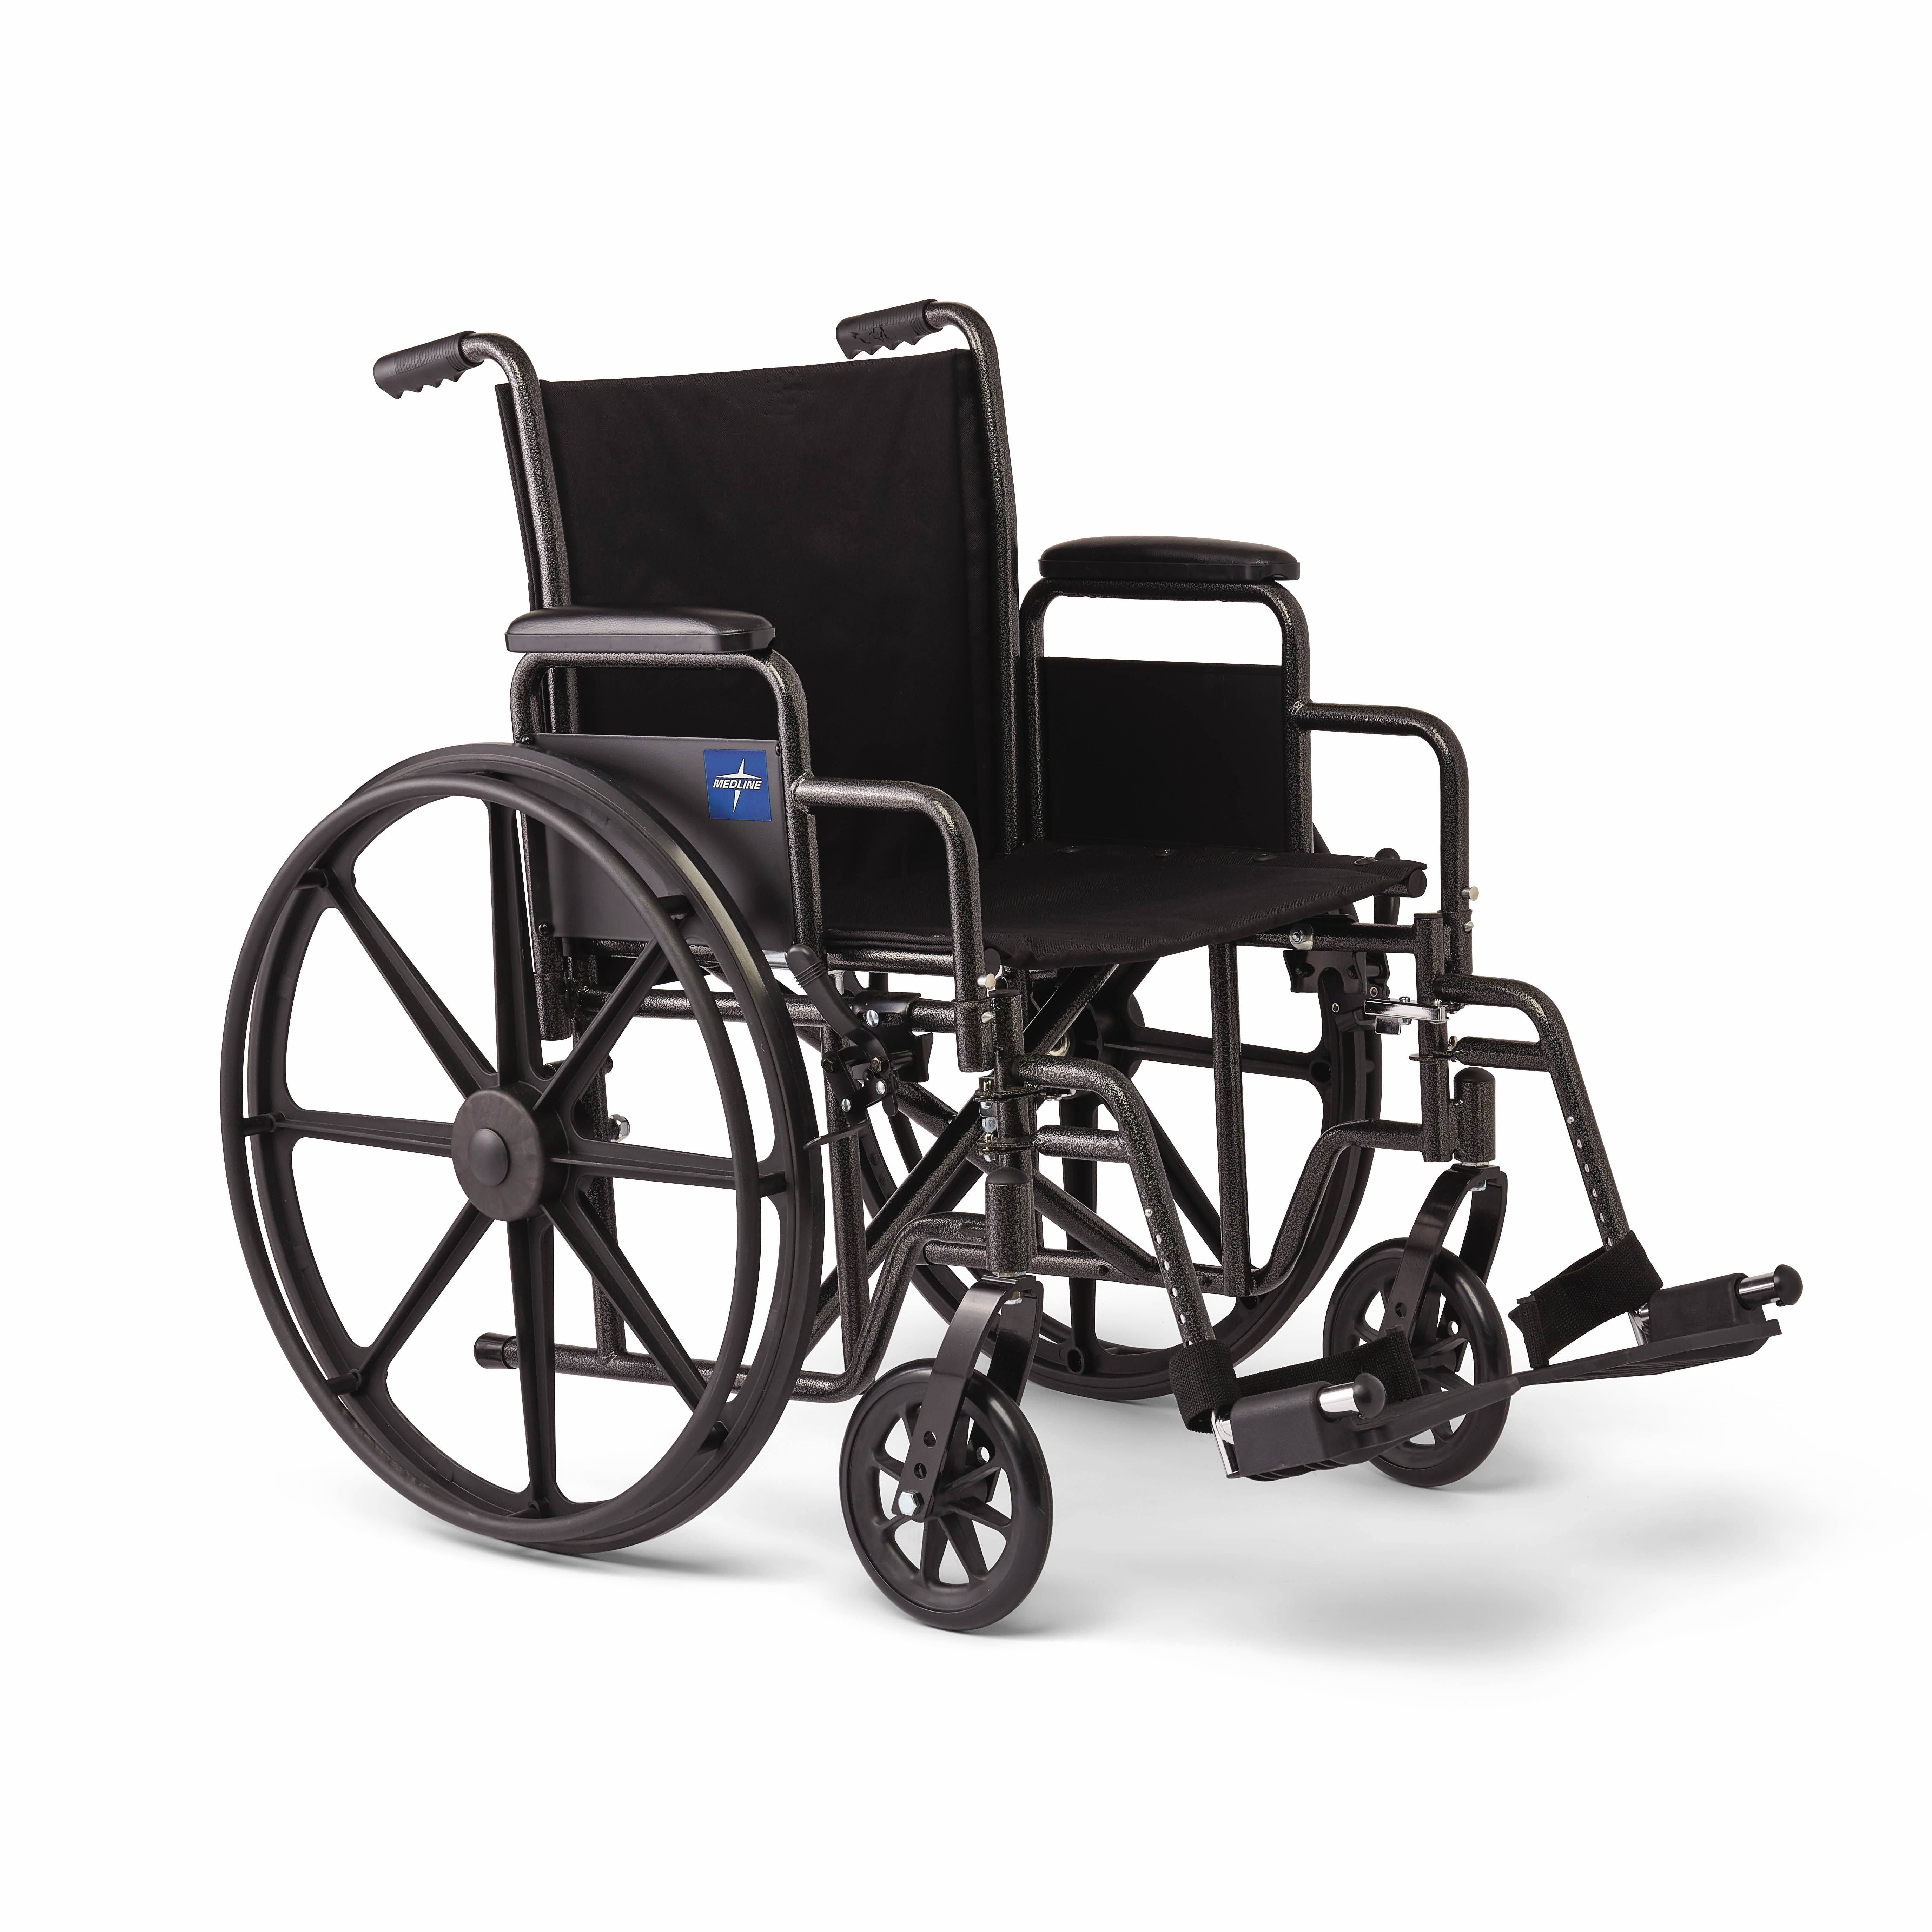 Medline Strong and Sturdy Wheelchair with Desk-Length Arms and Swing-Away Leg Rests For Easy Transfers, 16 Seat